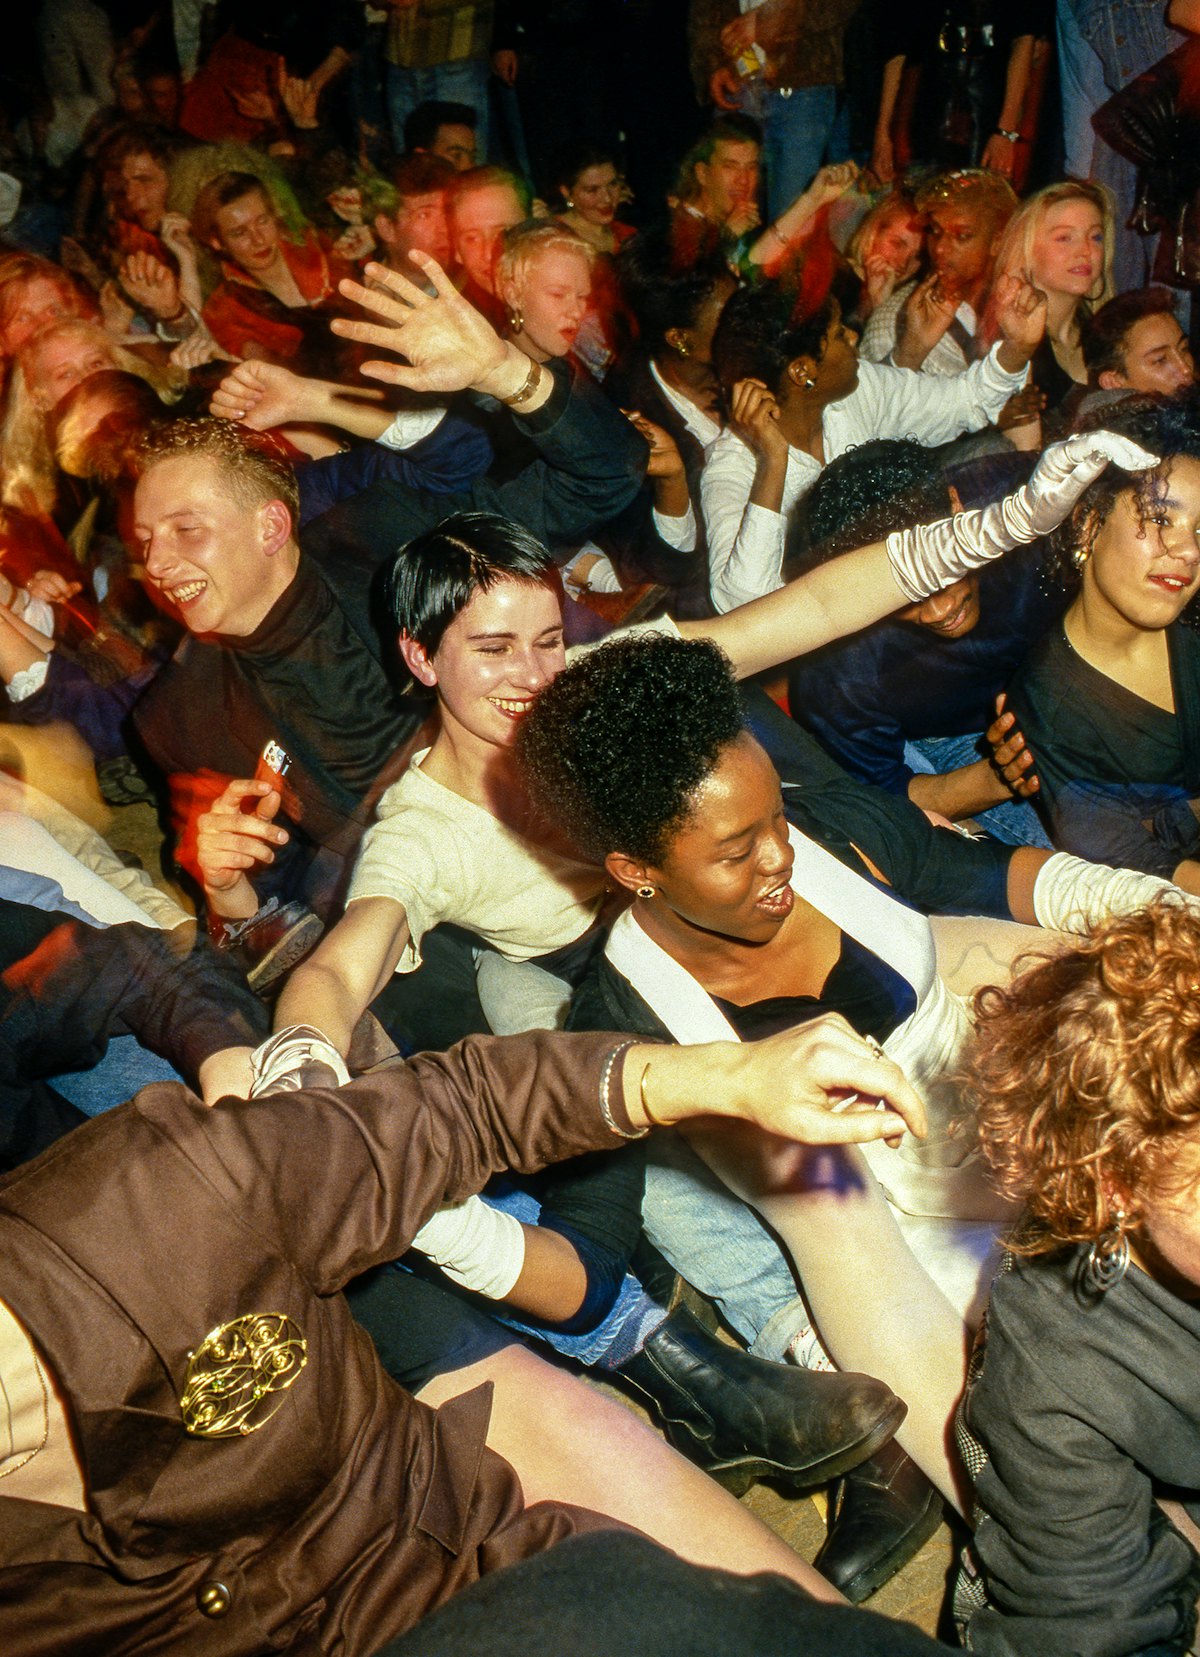 Revelers at Discotheque, London, 1988.